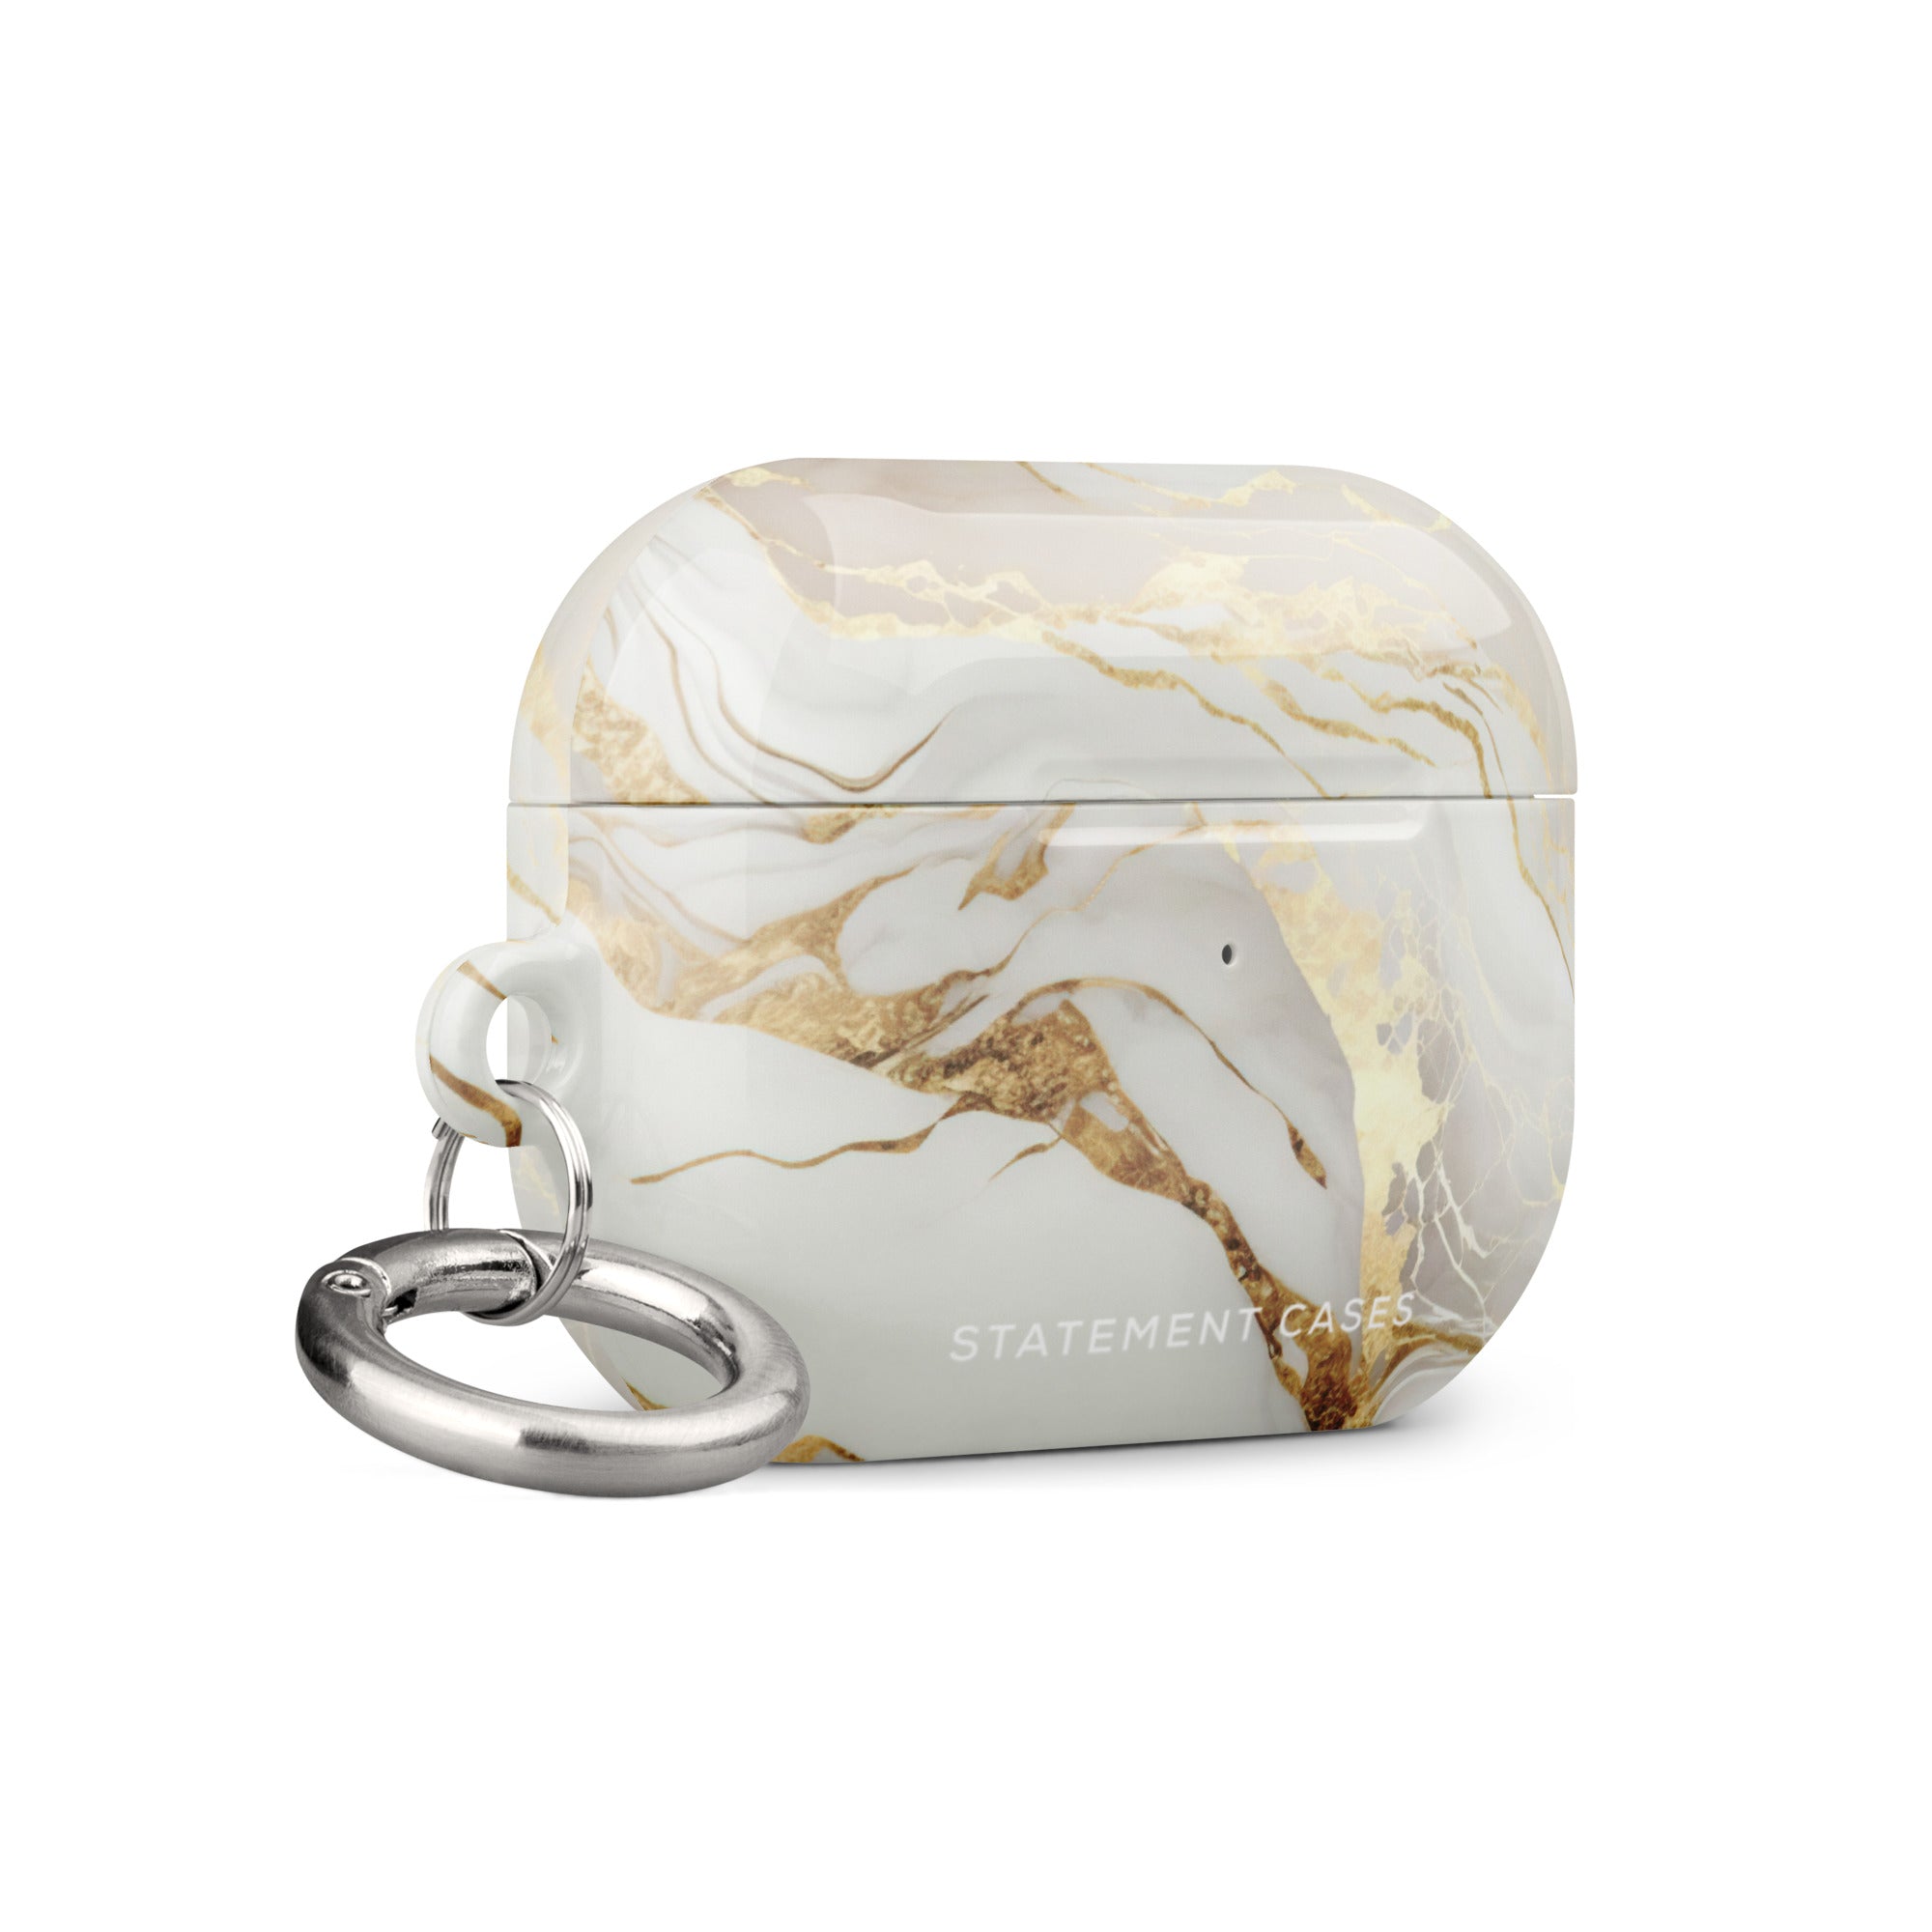 Golden Elegance for AirPods Pro Gen 2 with a marbled design in white, grey, and gold accents. It features the text "Statement Cases" on the front and has a metal carabiner attached. Made from impact-absorbing material, the case has a glossy finish and a cutout for the charging port.